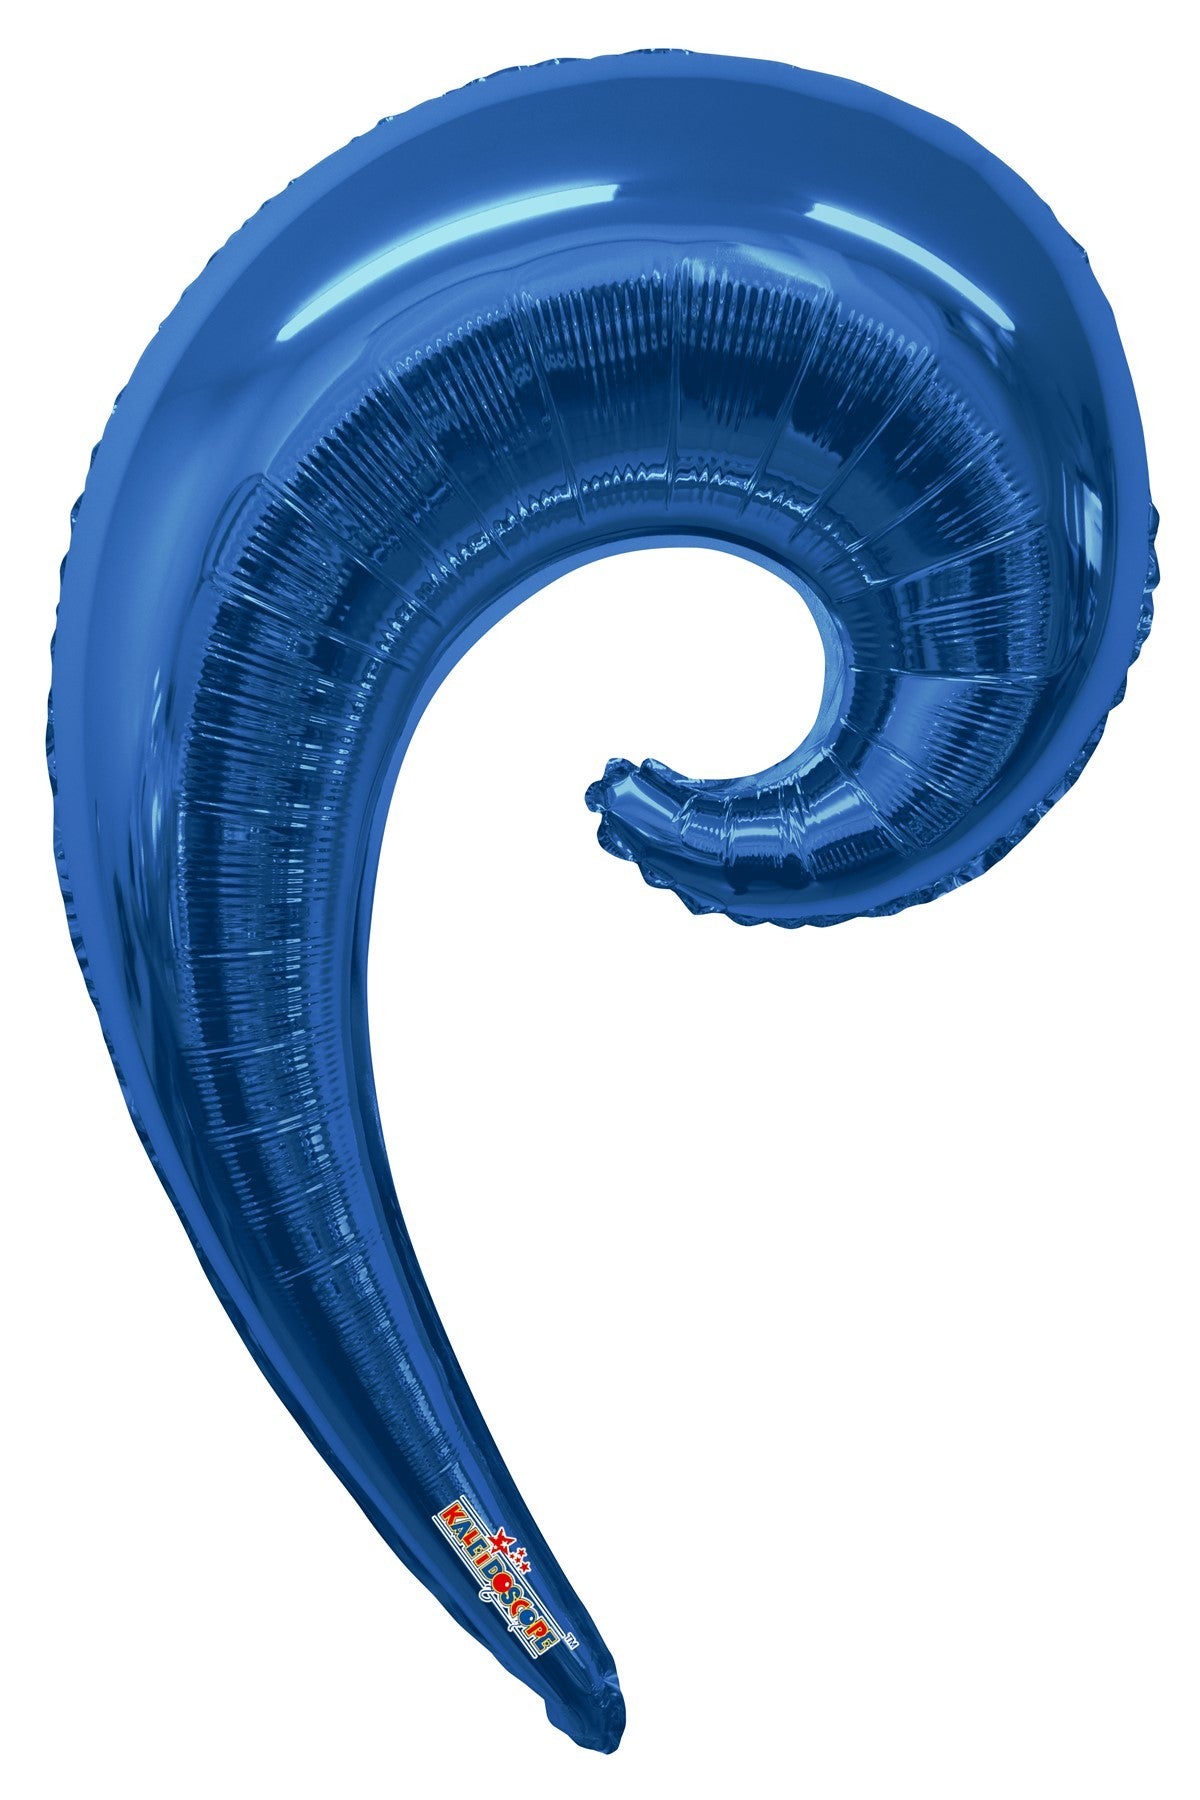 View Royal Blue Wave Balloon 36 inch information